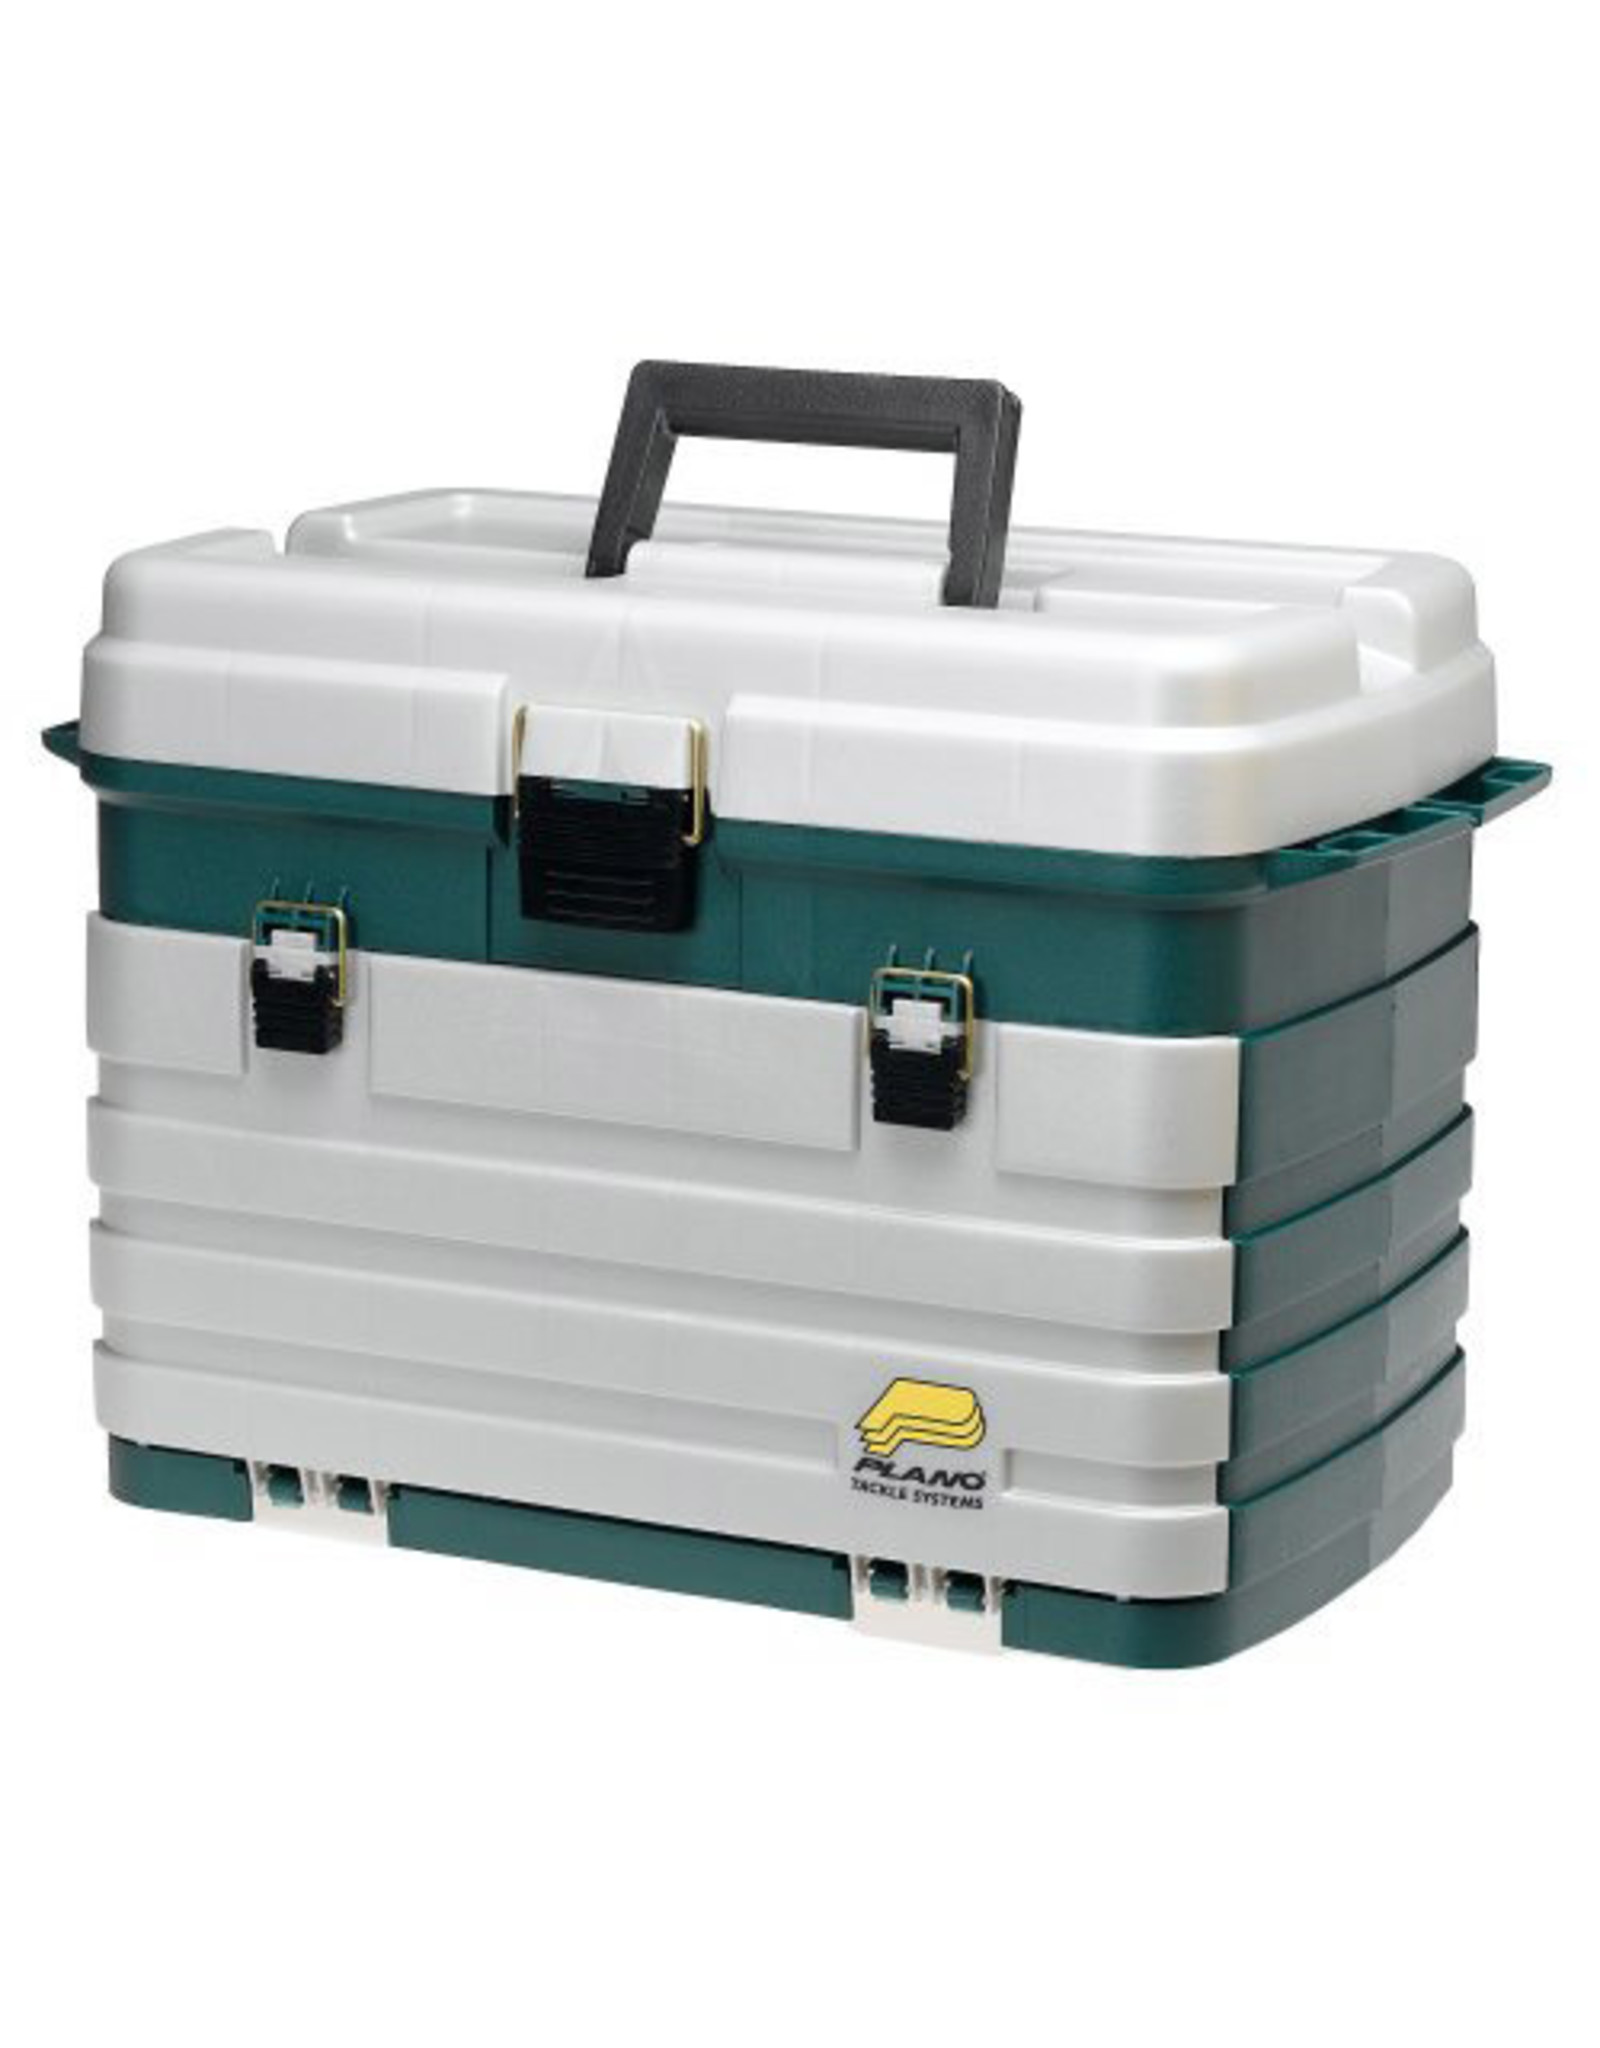 Plano FourDrawer Tackle Box Larry's Sporting Goods